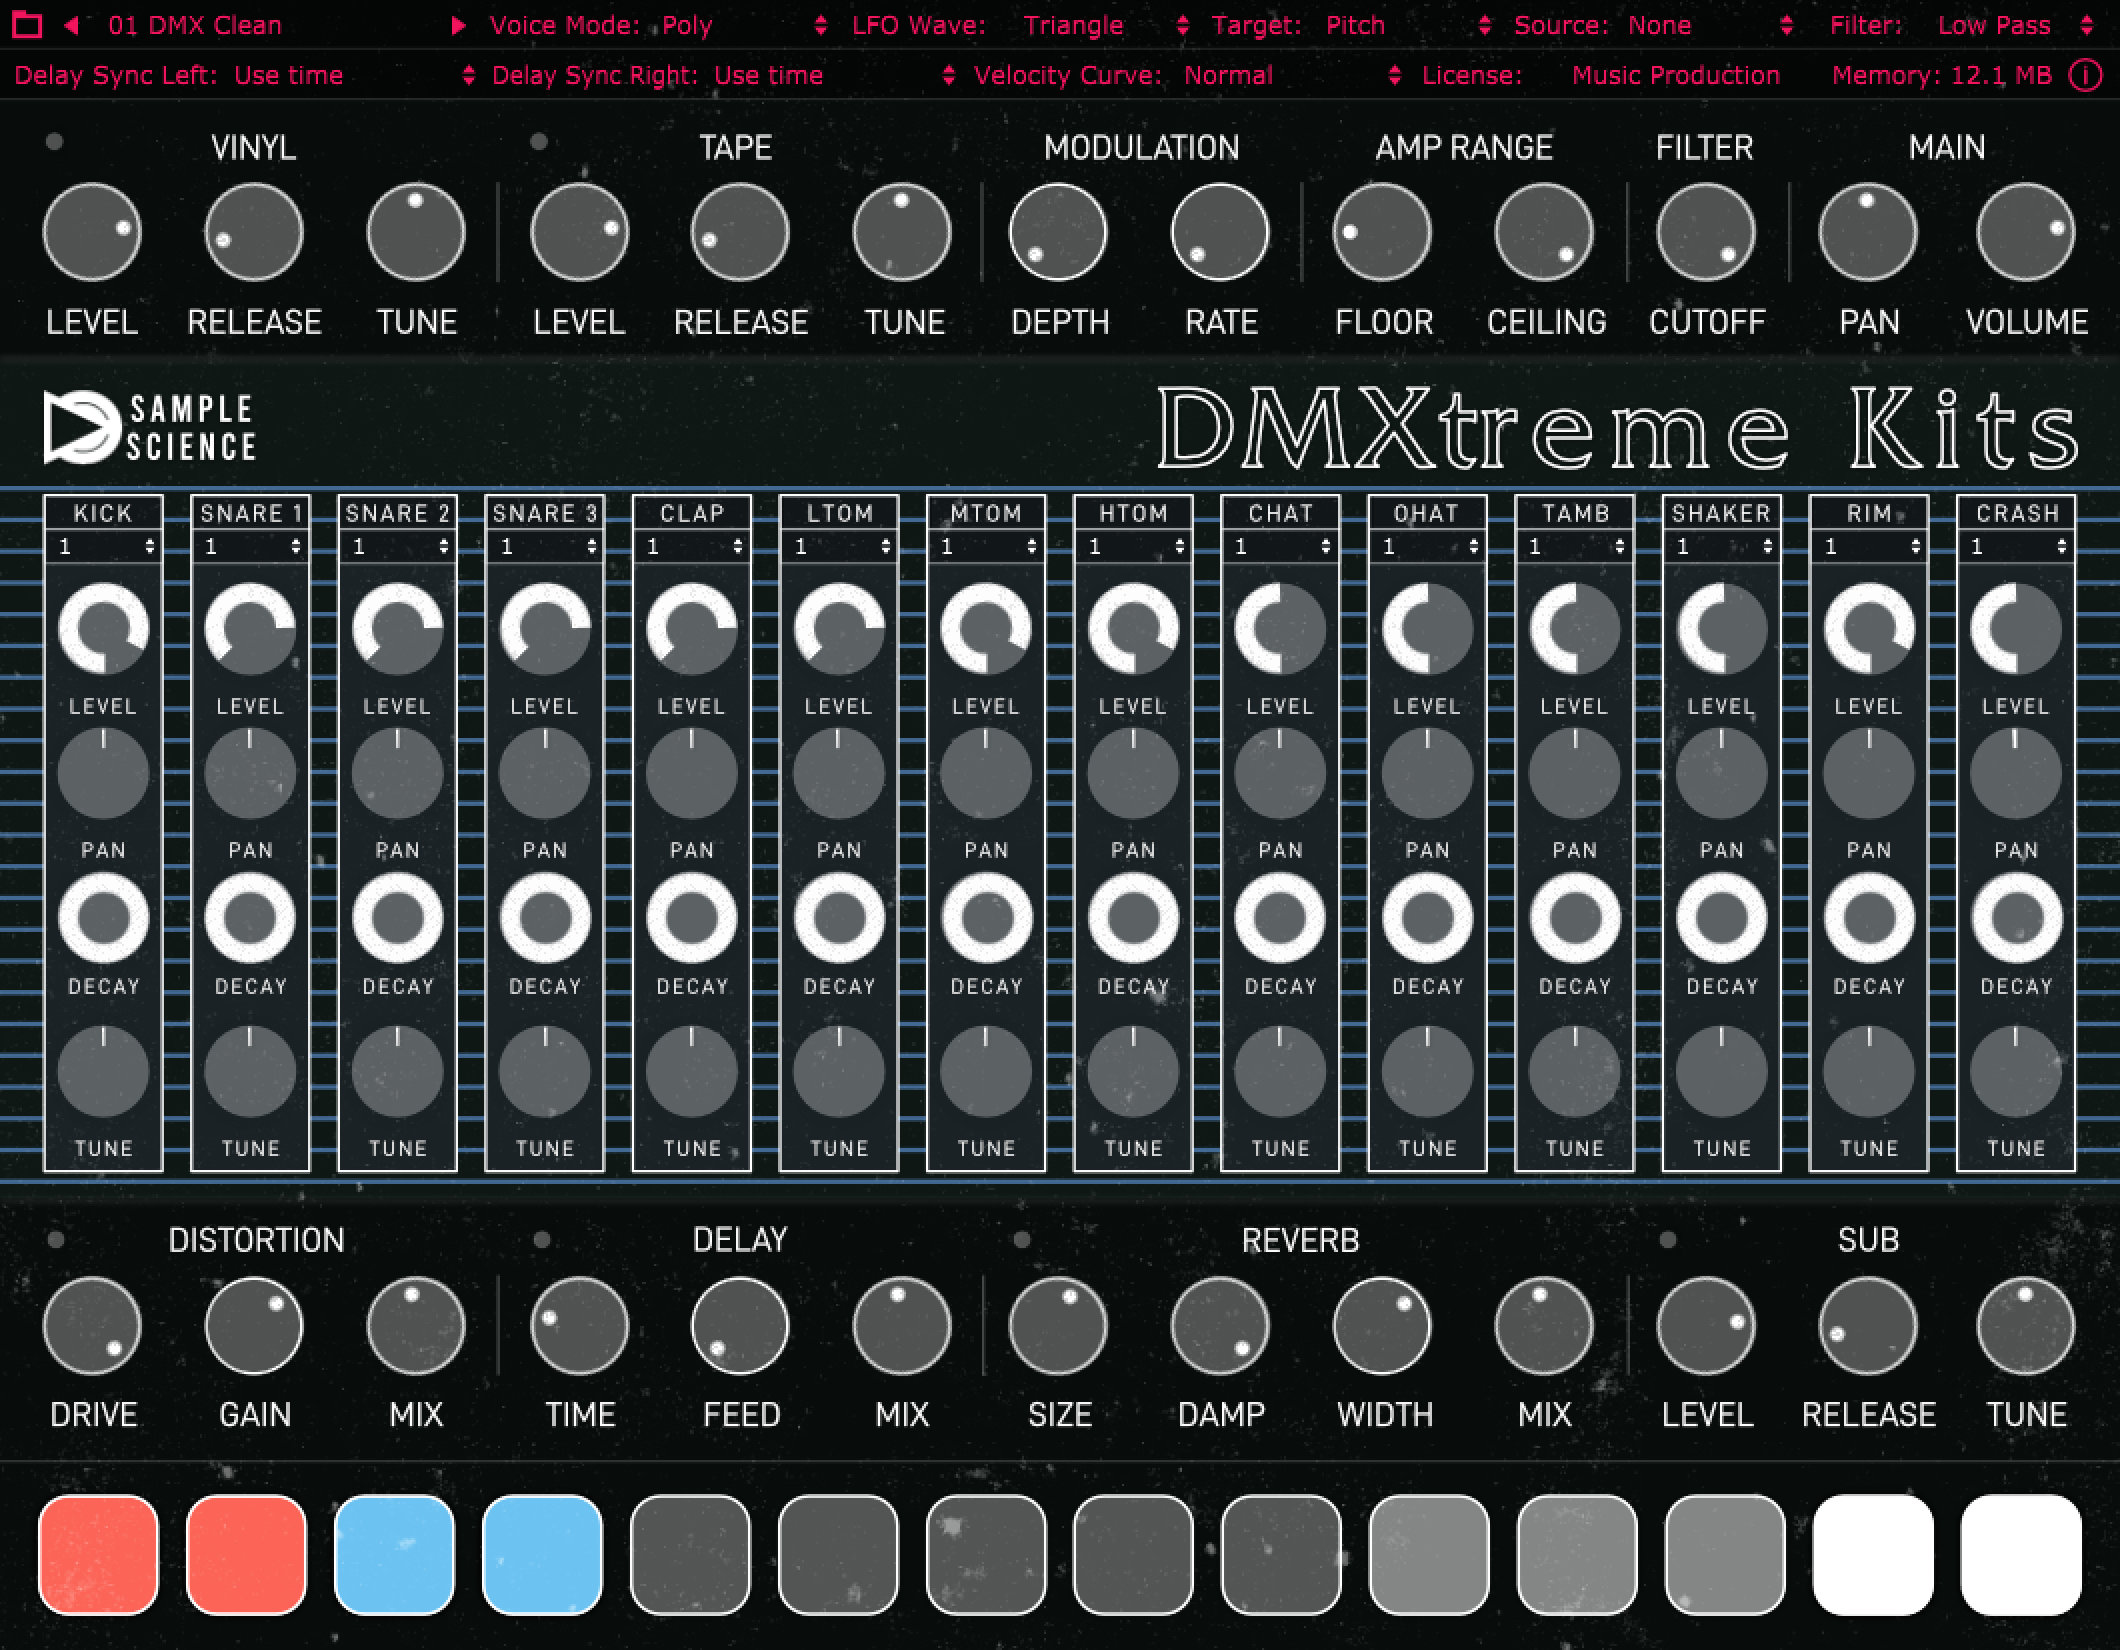 SampleScience releases DMXtreme Kits plugin based on the DMX drum machine from the 80s